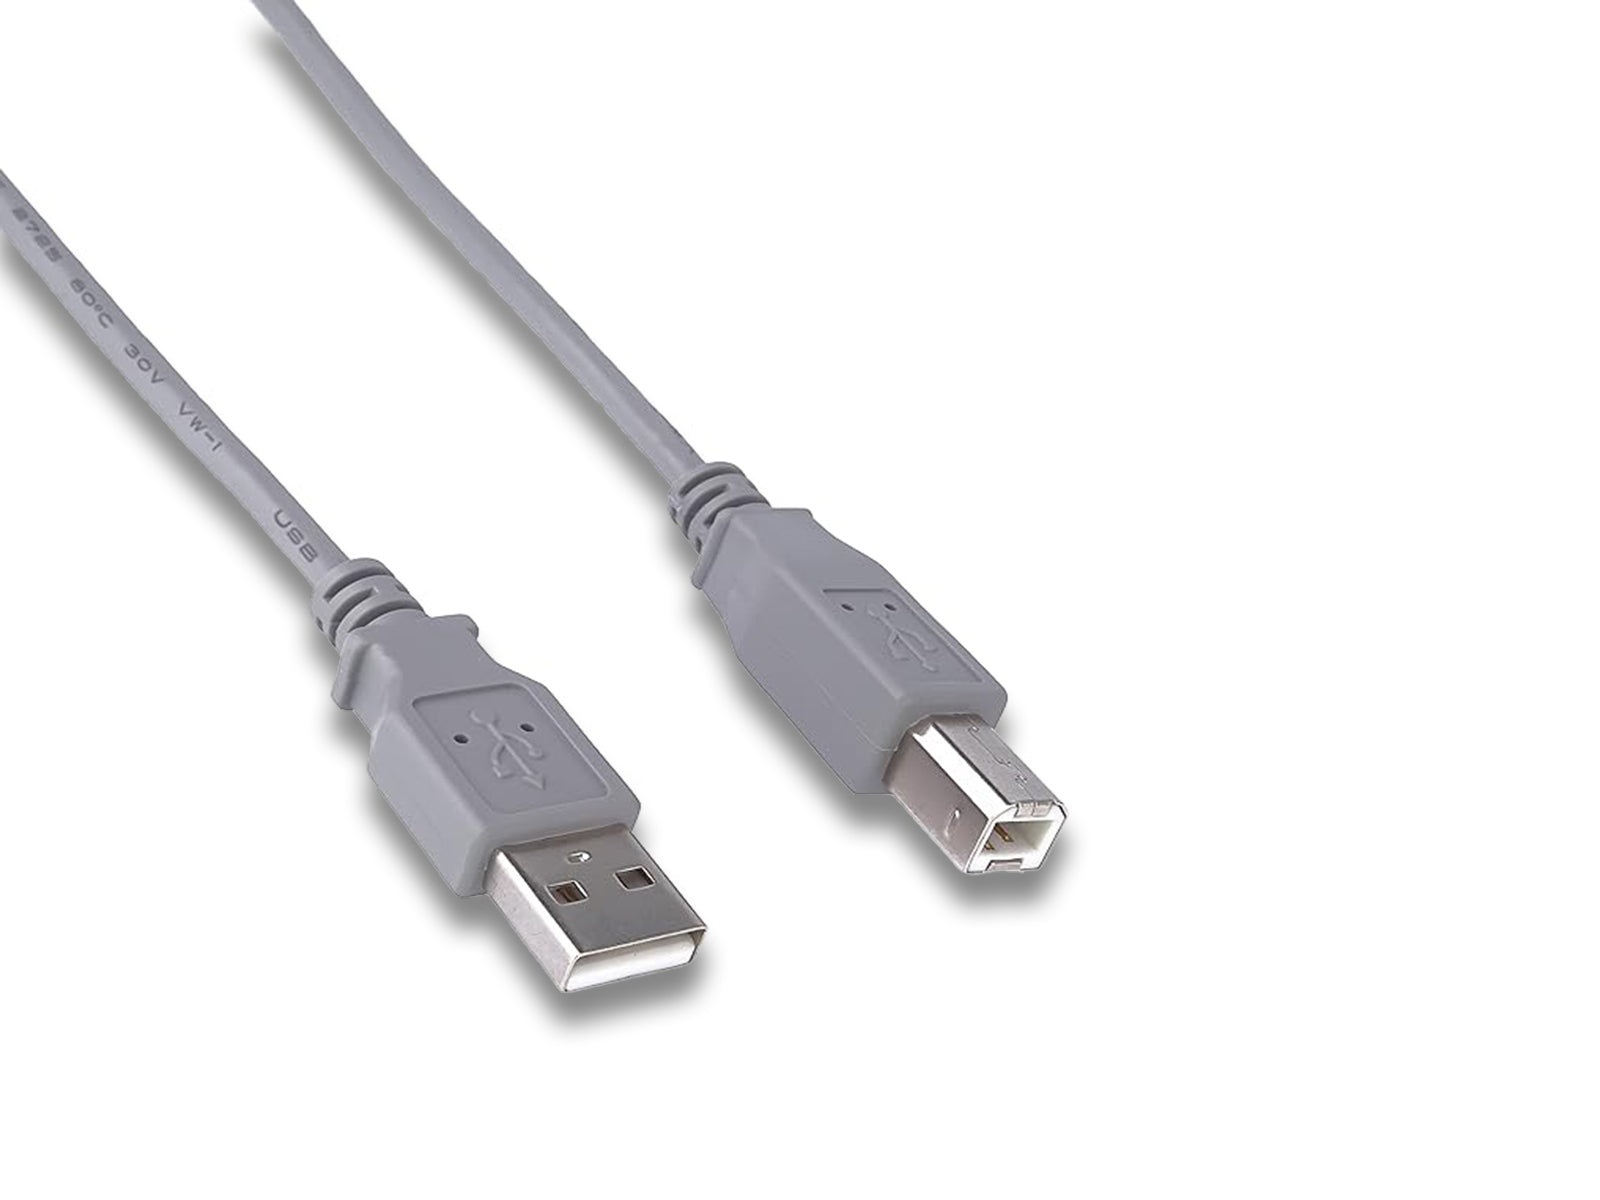 Printer Cable with USB Type A & Male USB Type B